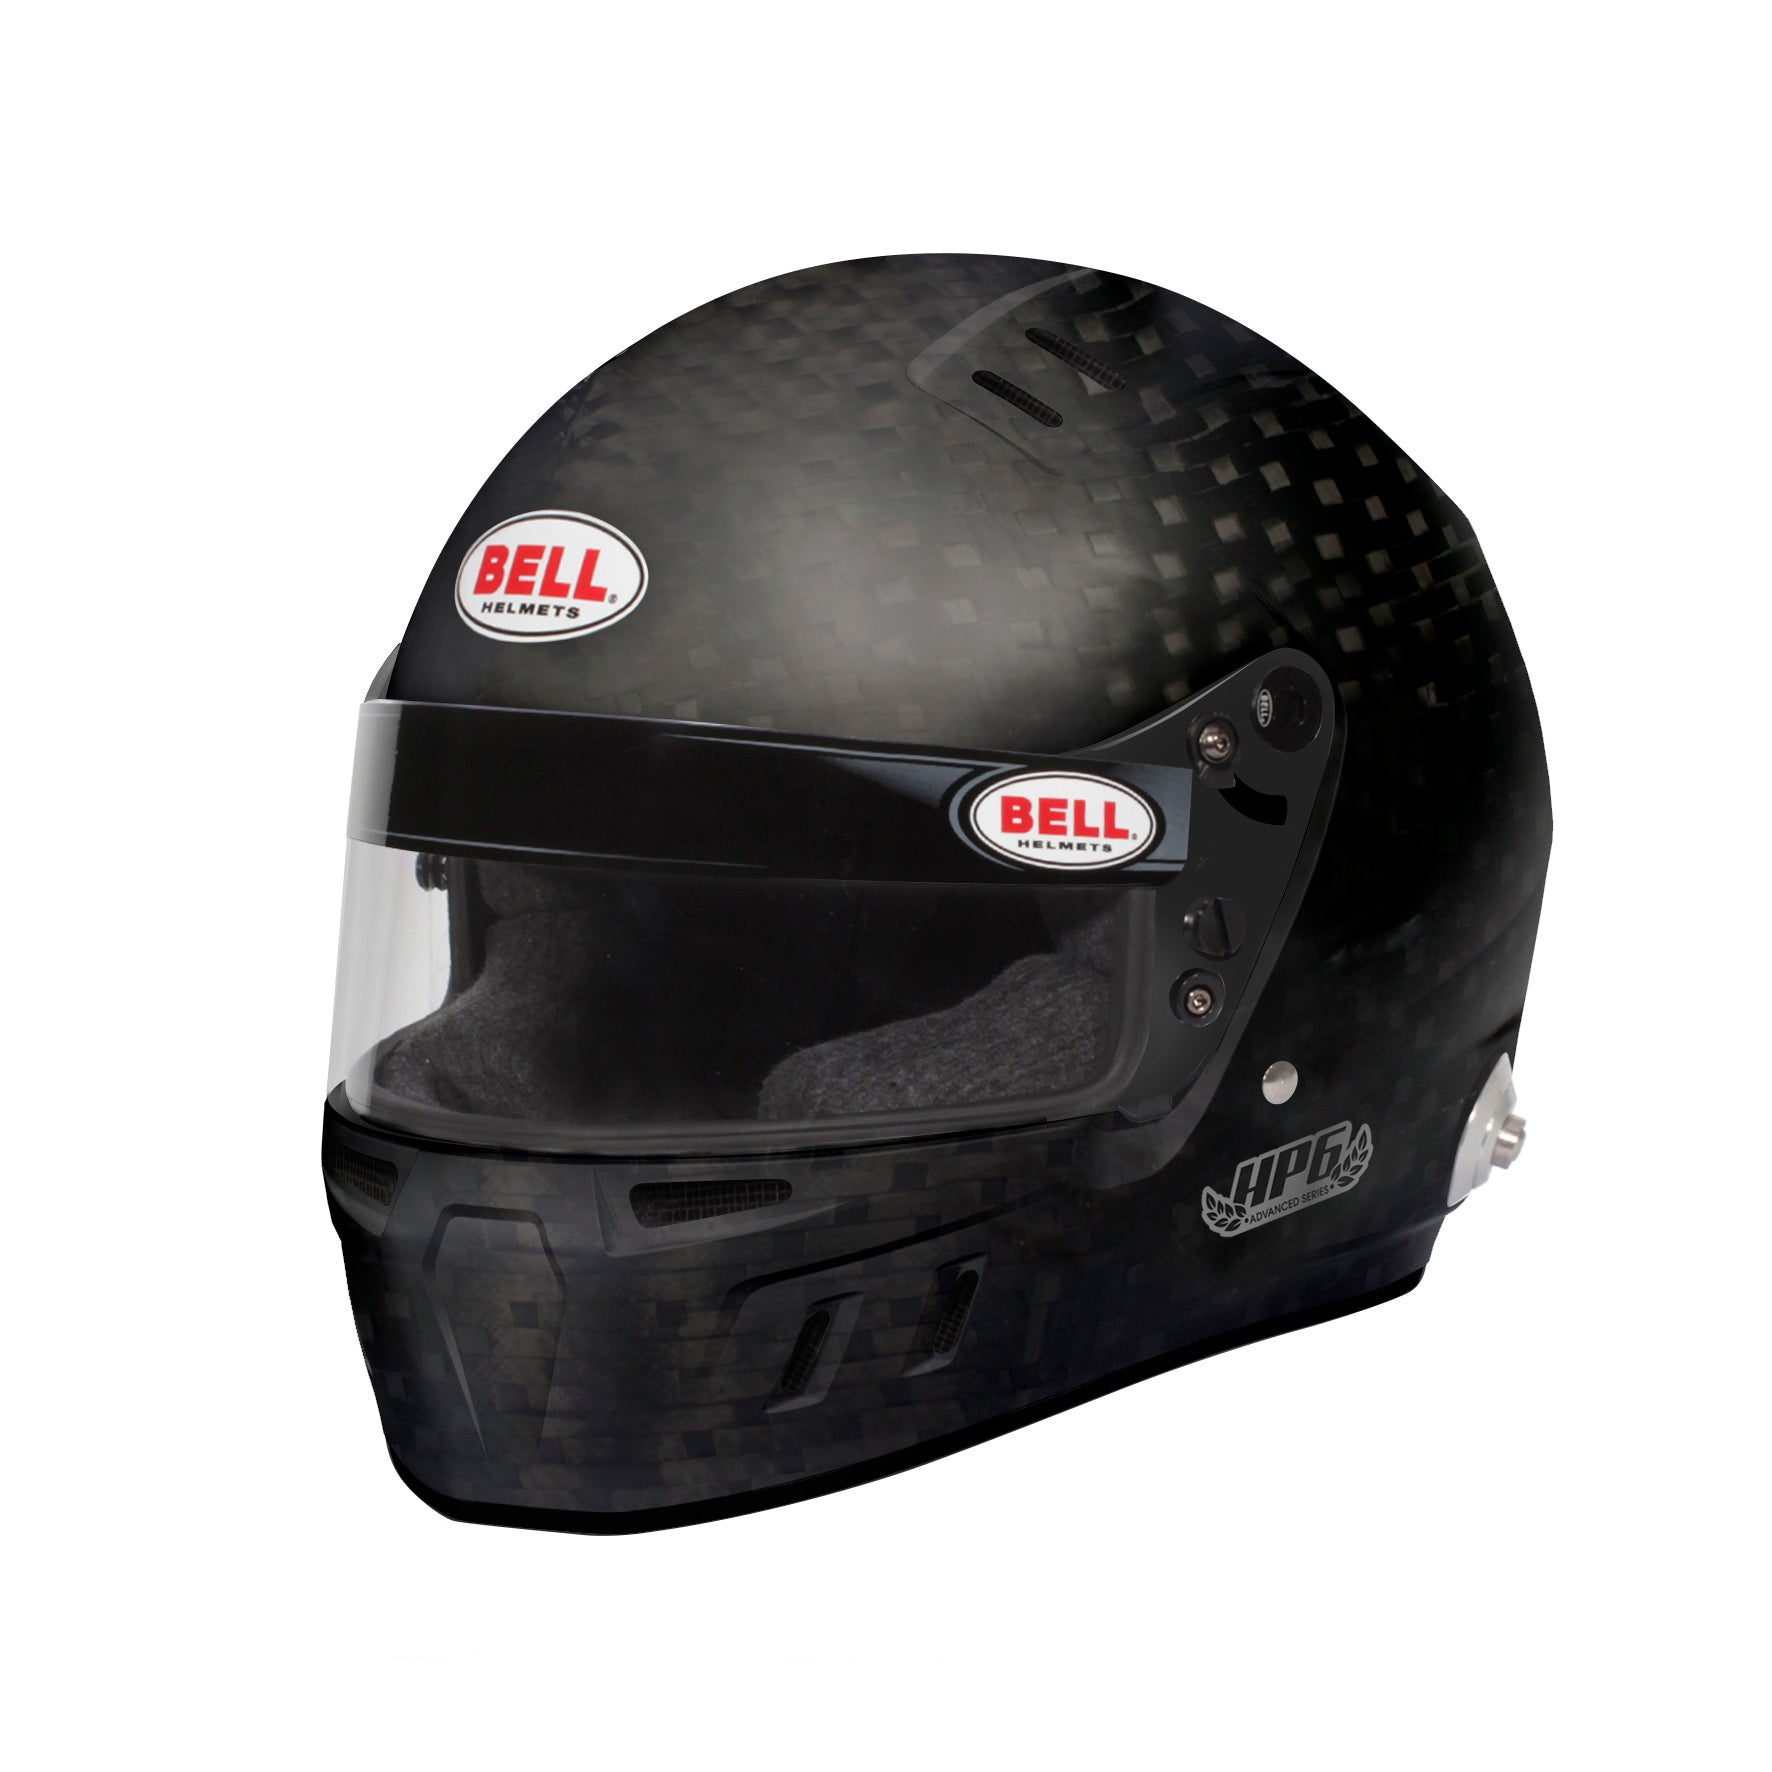 BELL 1140012 HP6 RD Racing helmet full-face, HANS, FIA8860-2018, carbon, size 56 (7) Photo-0 